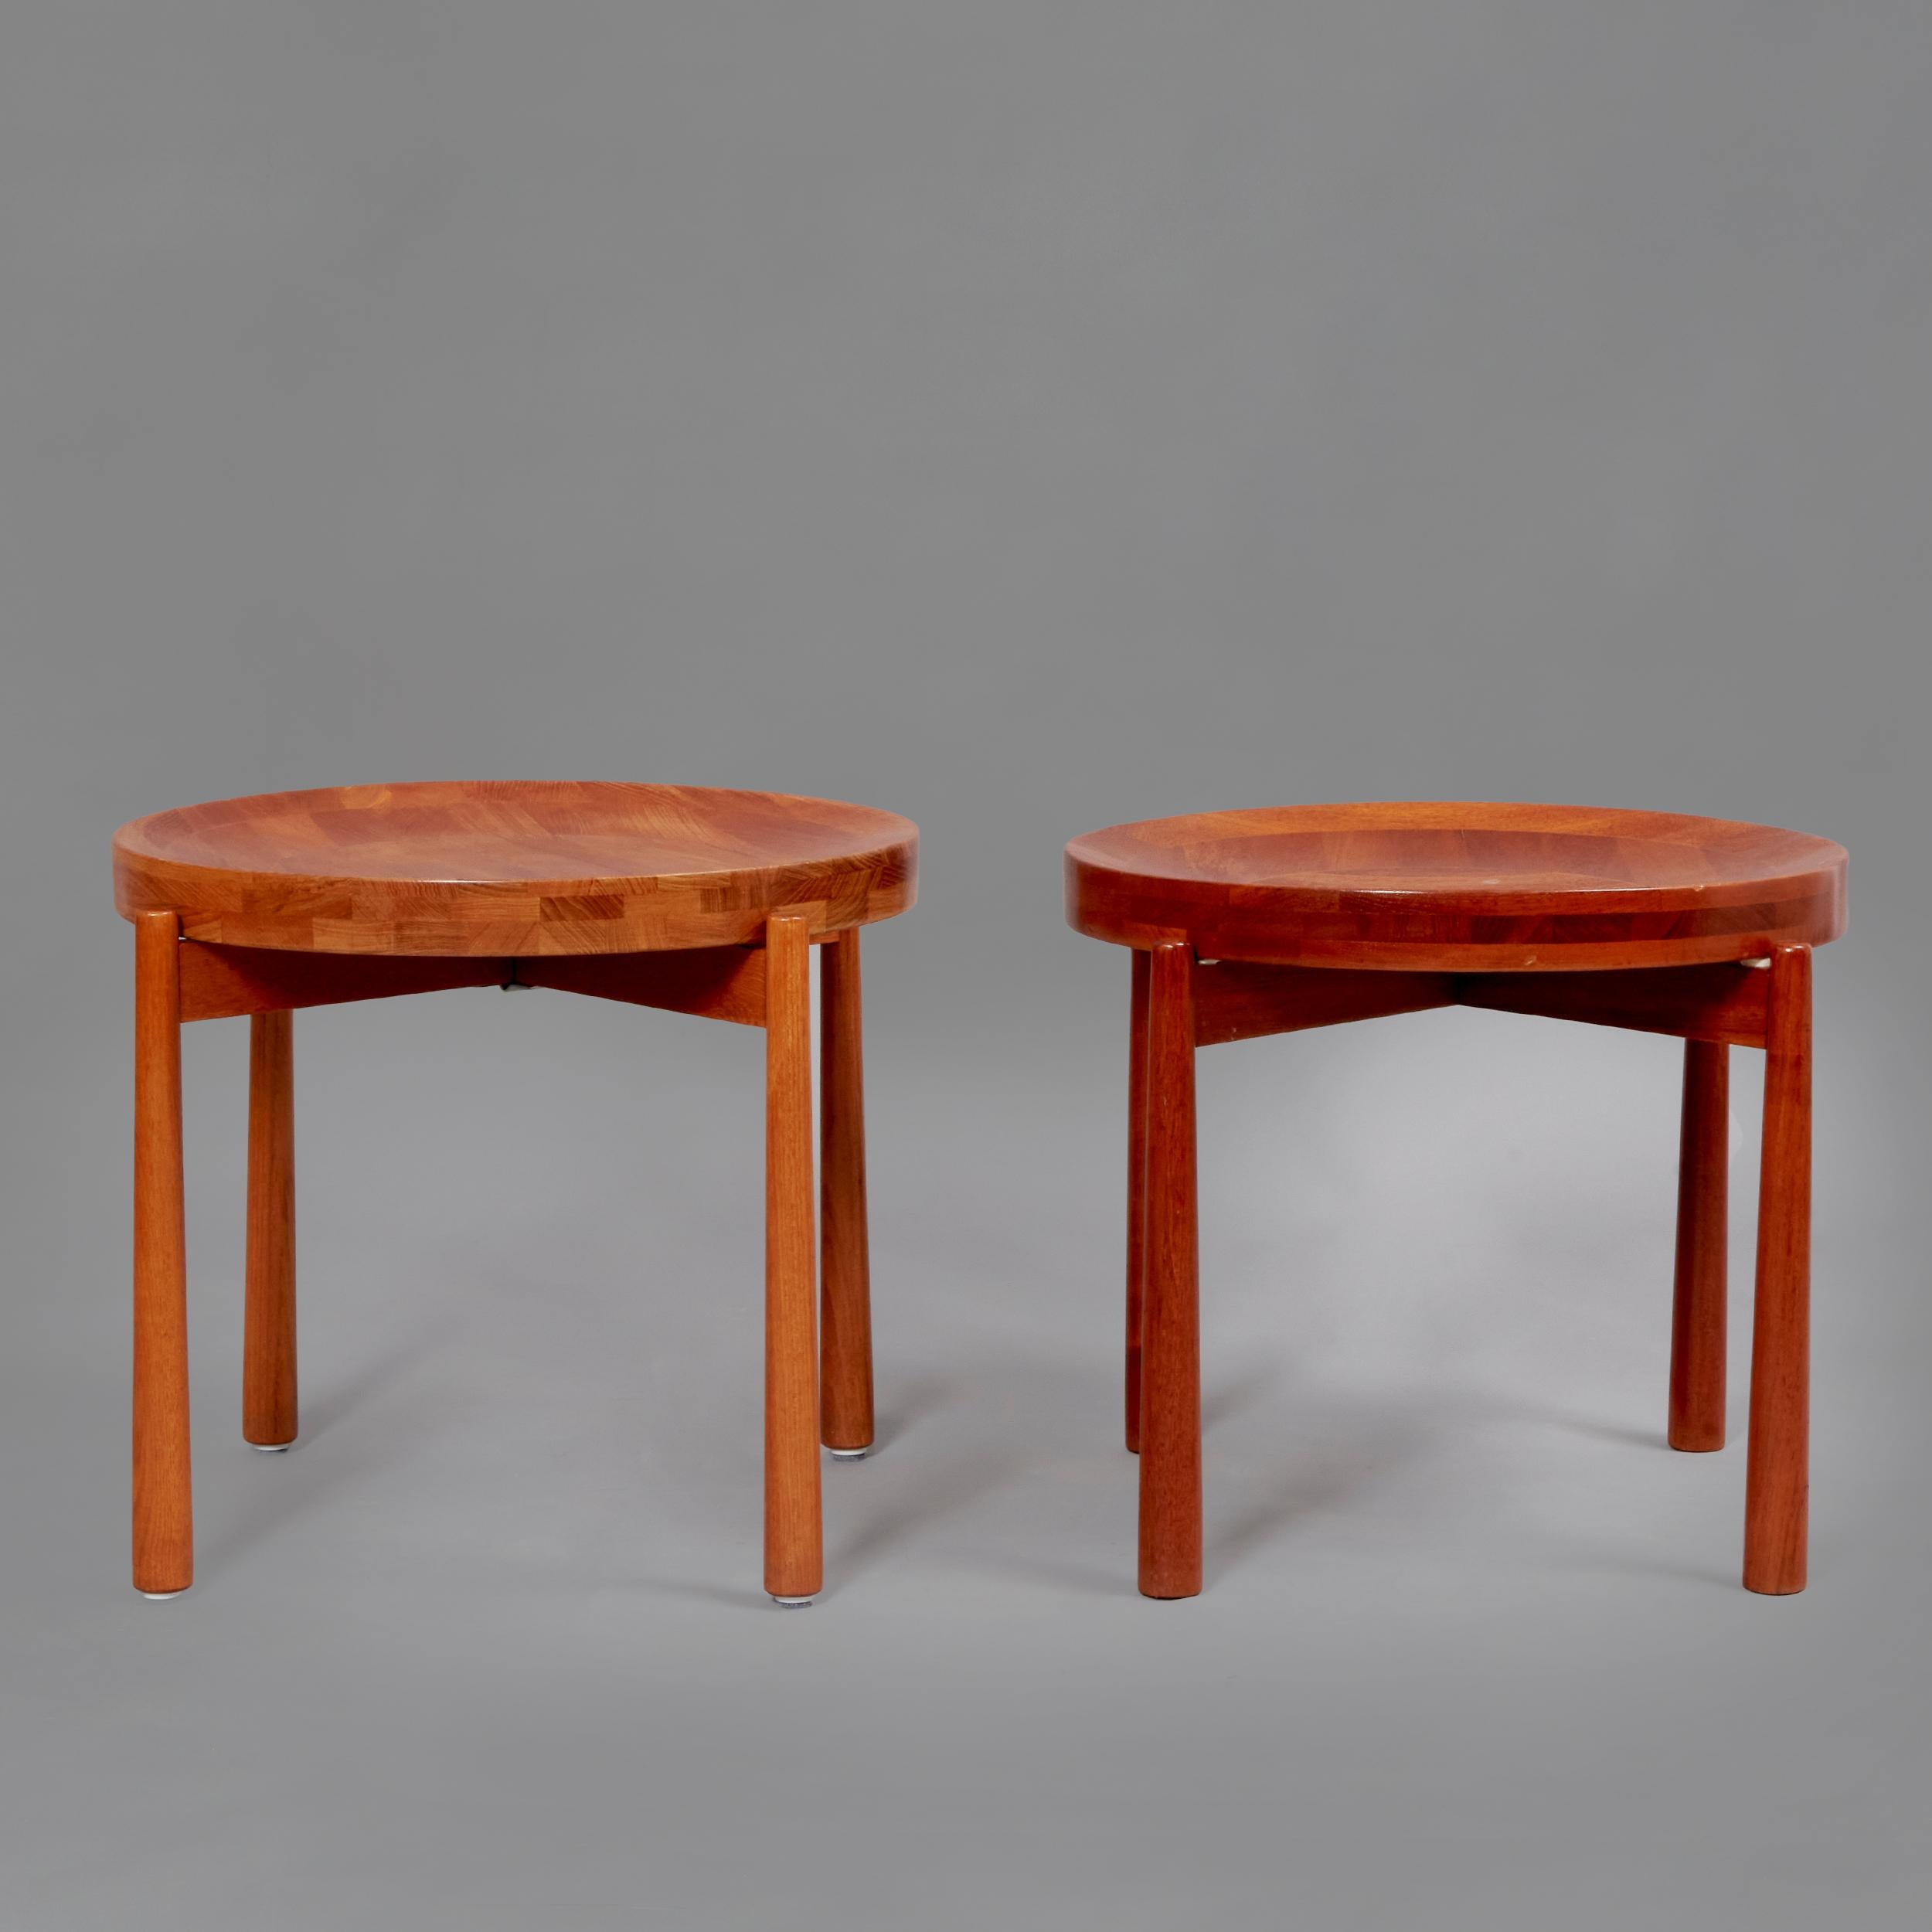 Side table in teak wood designed by Jens Quistgaard. Denmark, 50s
Jens quistgaard is a Danish sculptor and designer. Well known internationally for popularizing Scandinavian design in the USA, He worked for Dansk Designs and Nissen among others. His